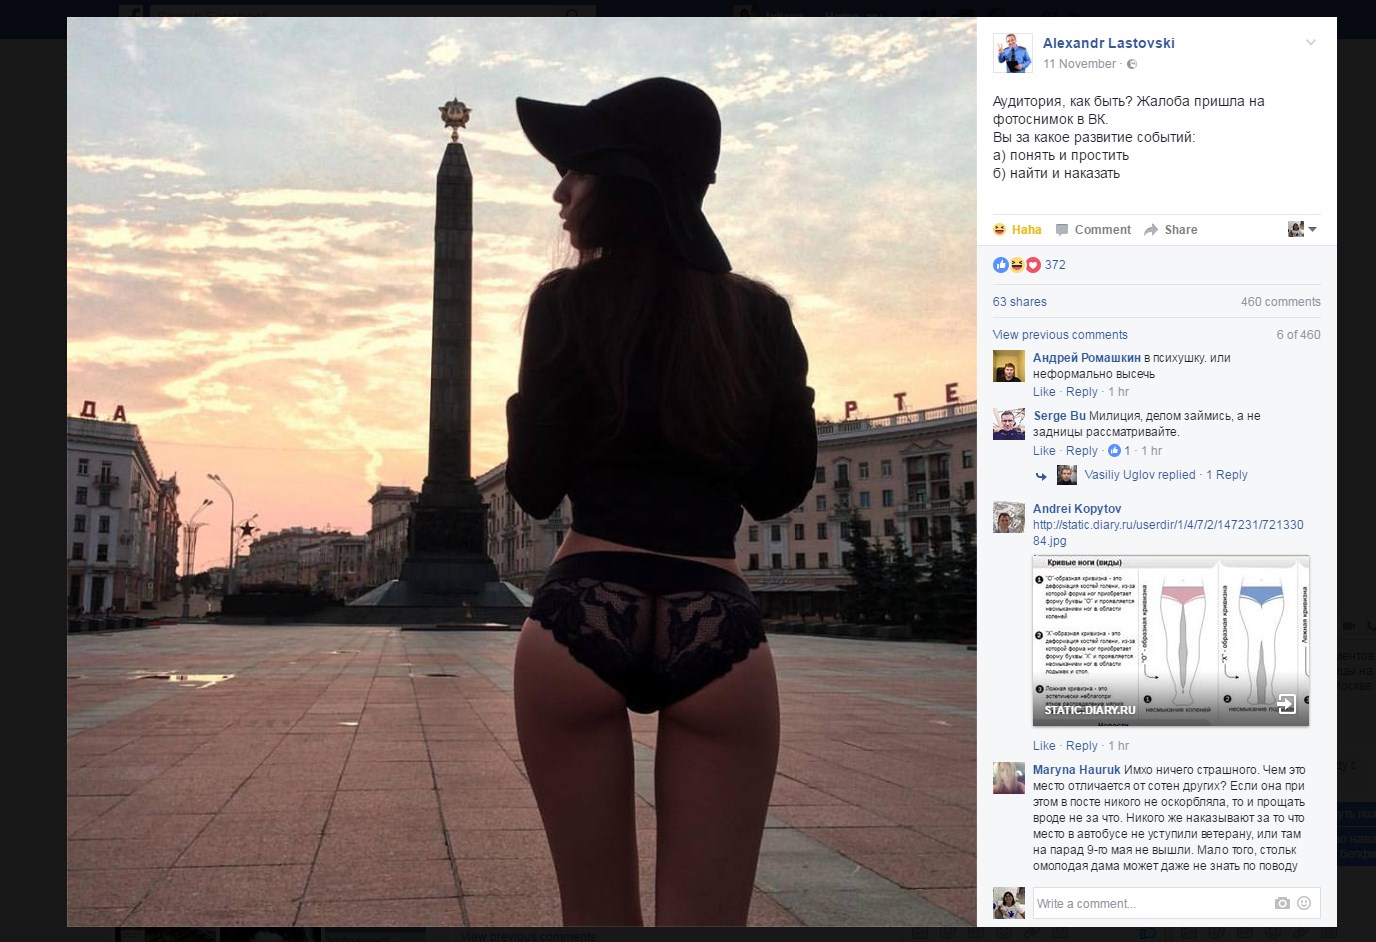 Minsk police decide to take action against “panties intruder”